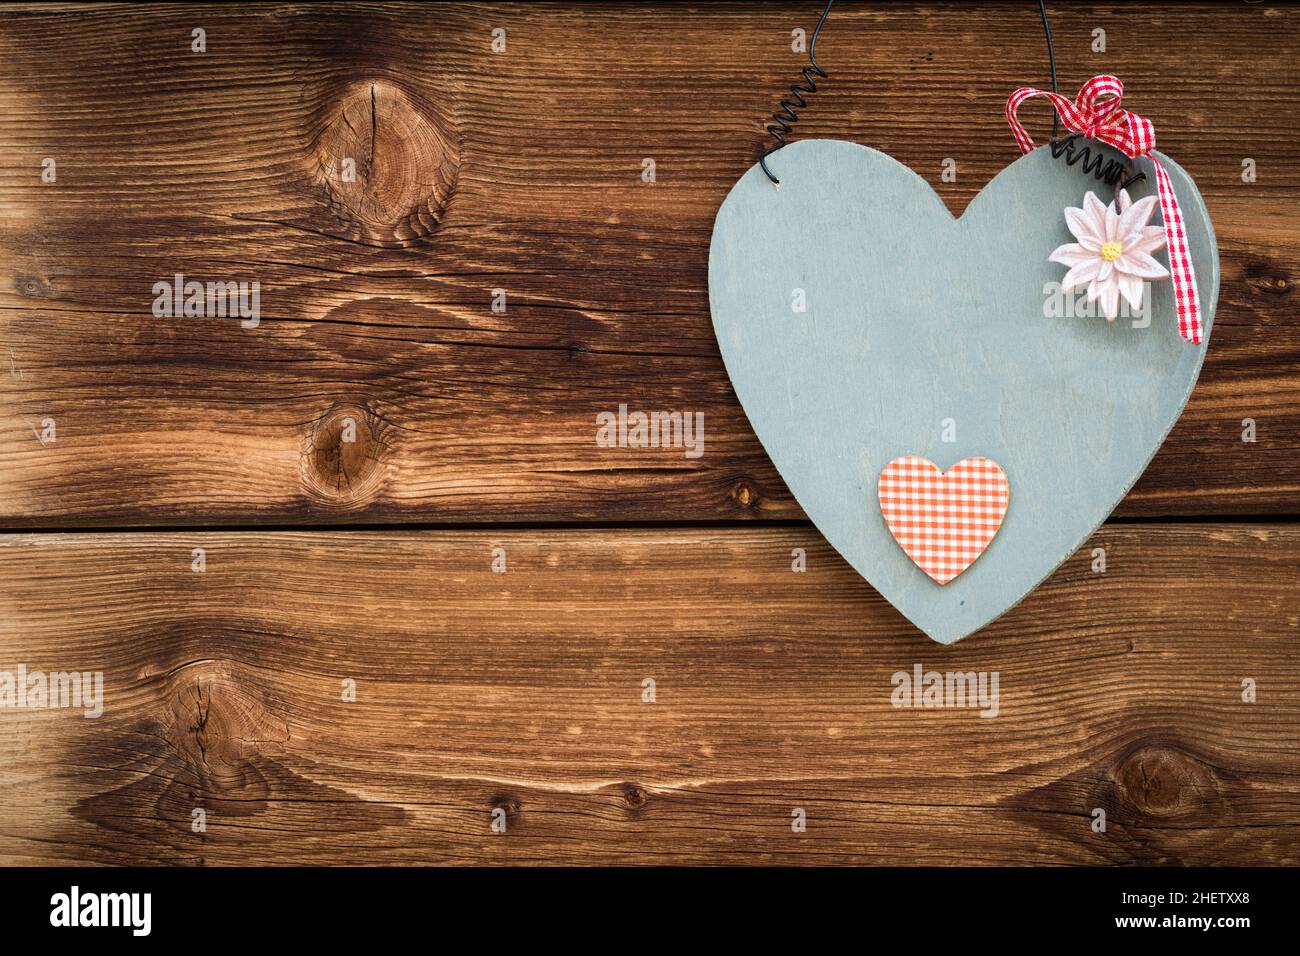 wooden grey heart with edelweiss on sun burned wood planks Stock Photo